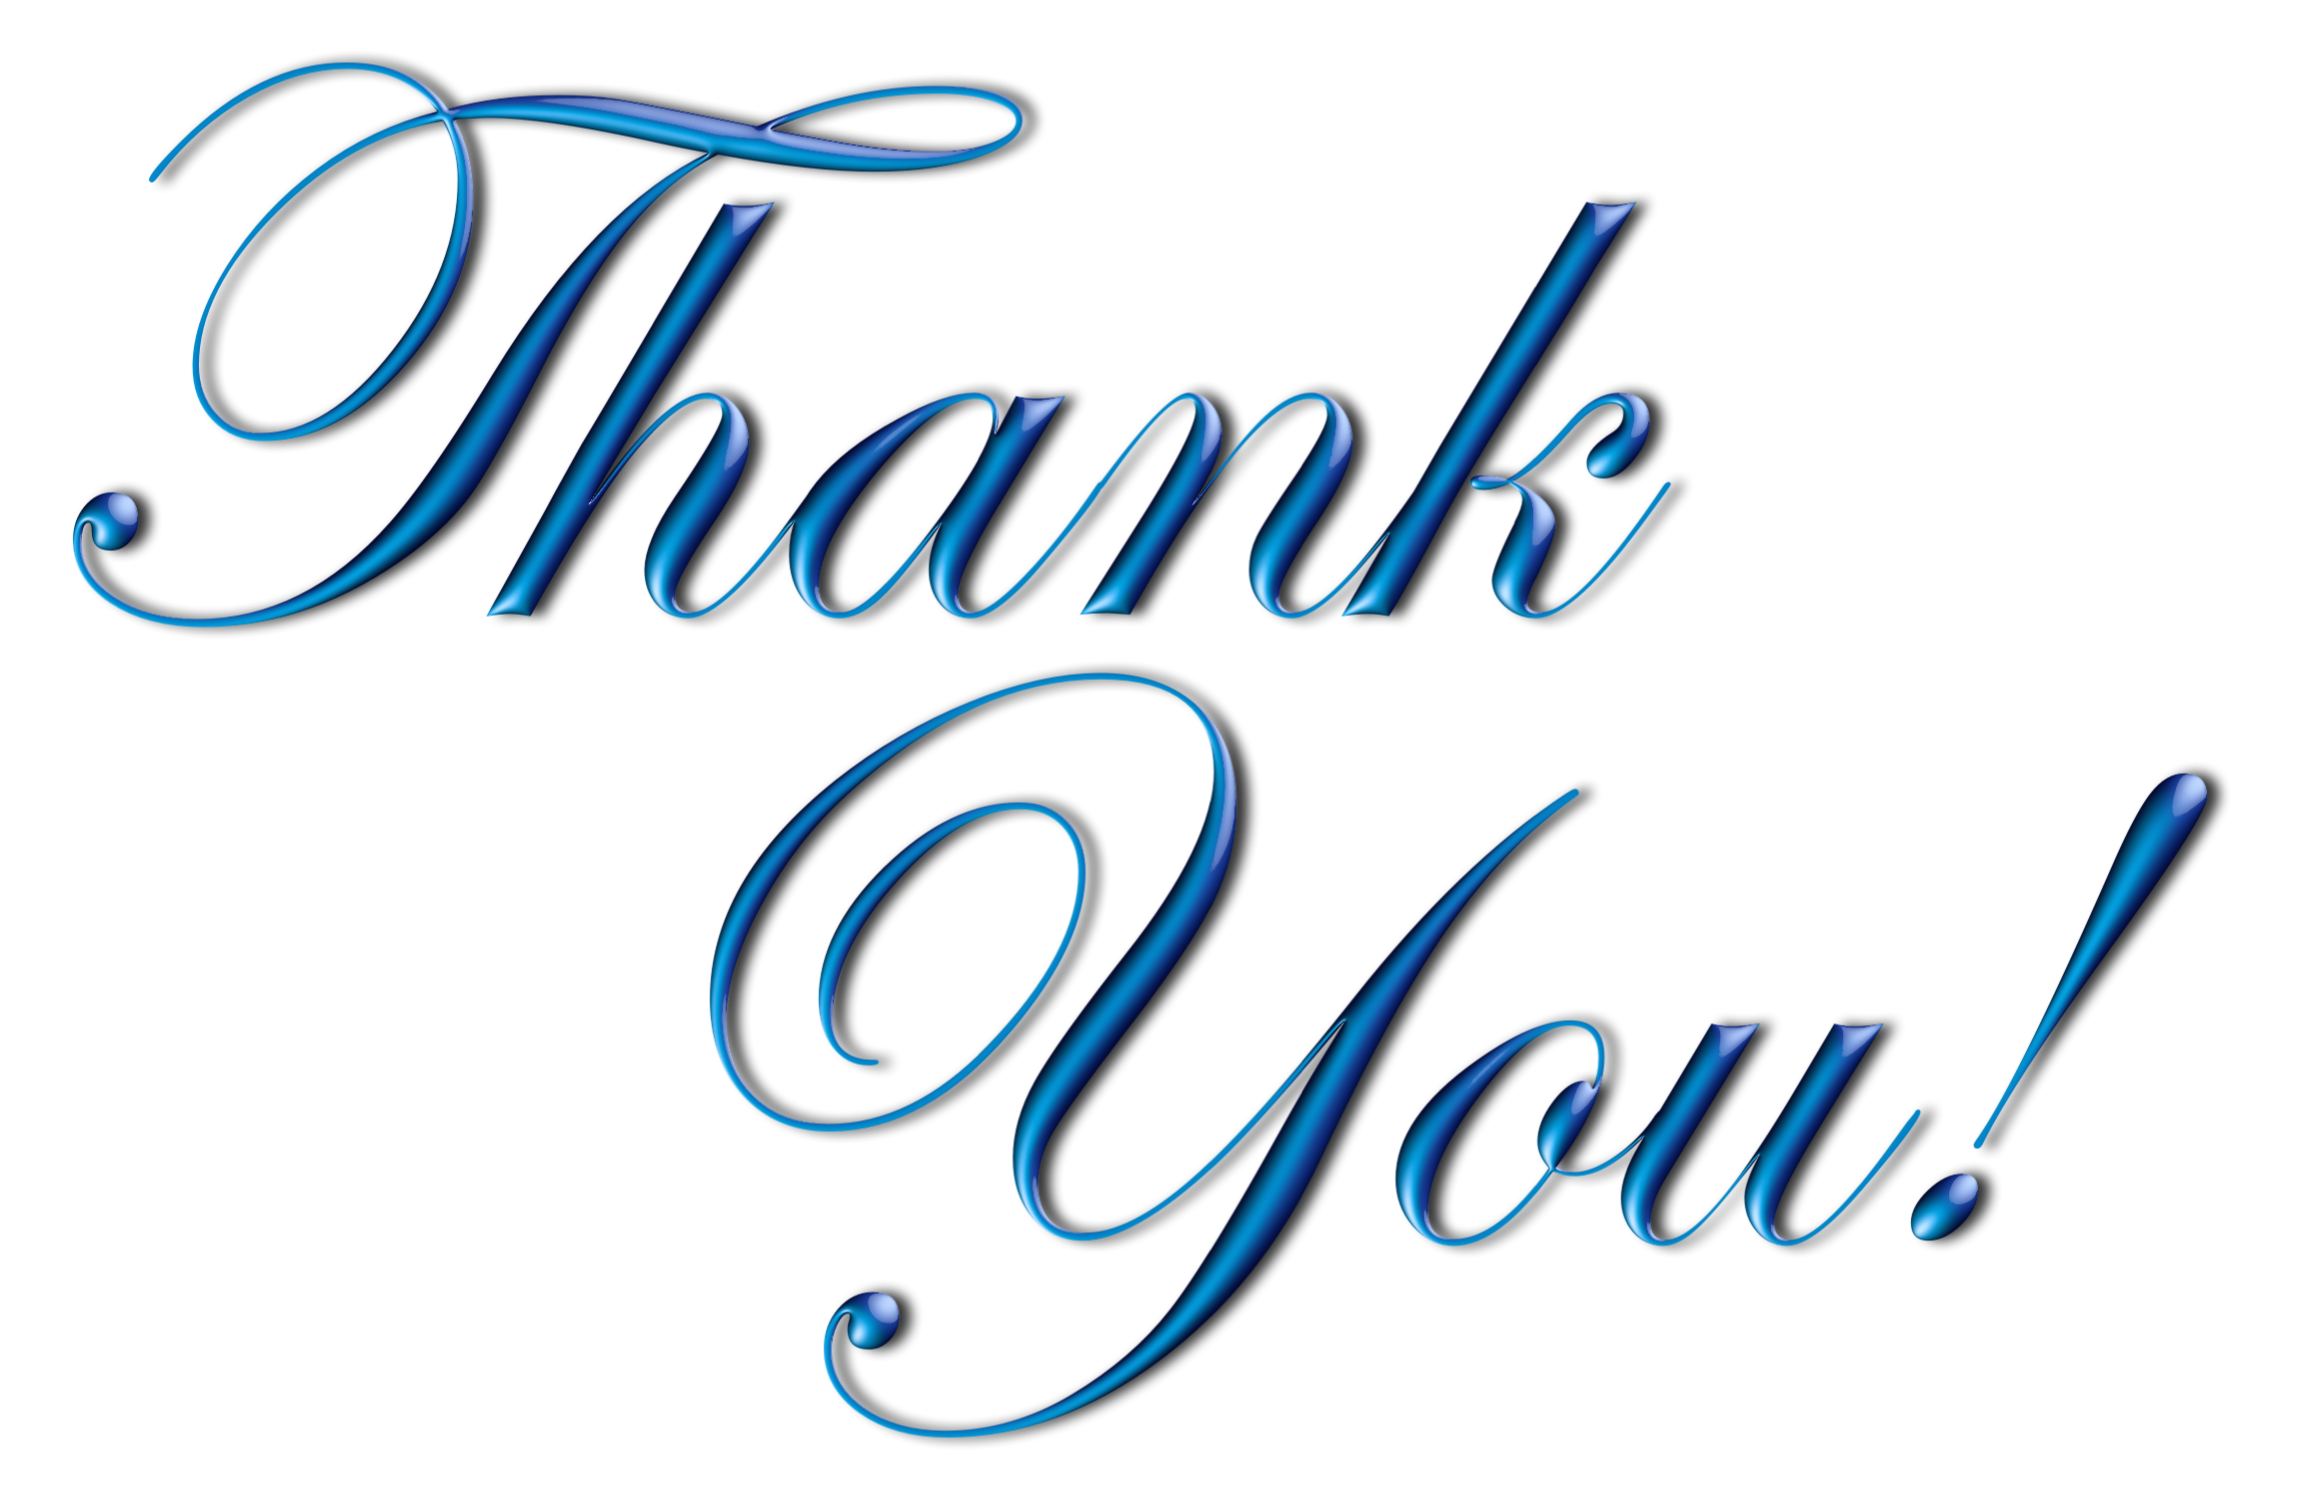 Thank you PNG transparent image download, size: 2316x1494px